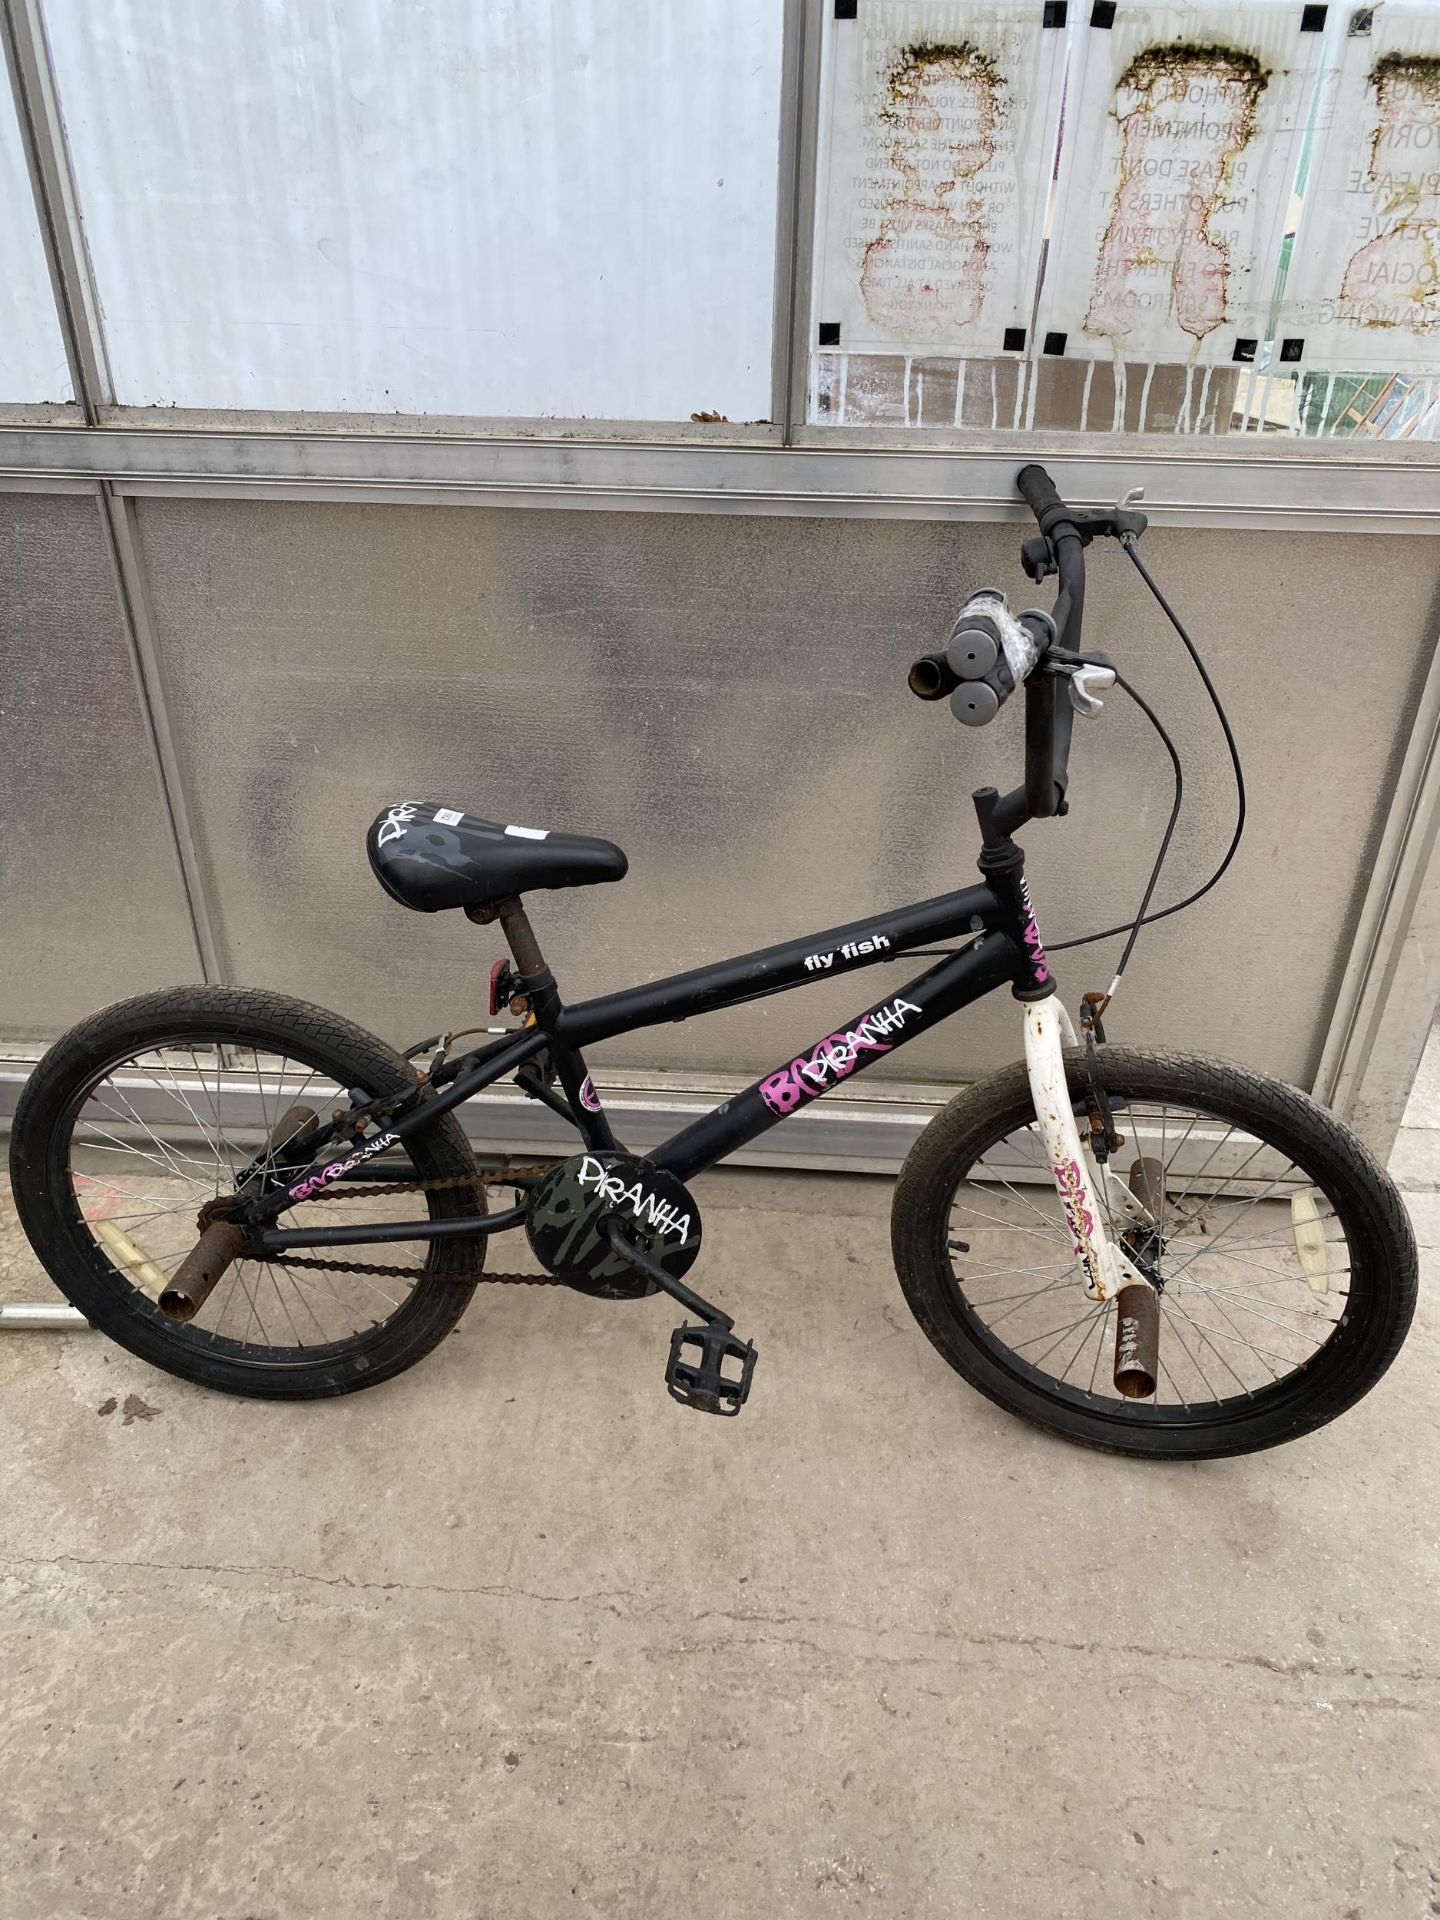 A PIRANHA BMX BIKE WITH FRONT AND REAR STUNT PEGS